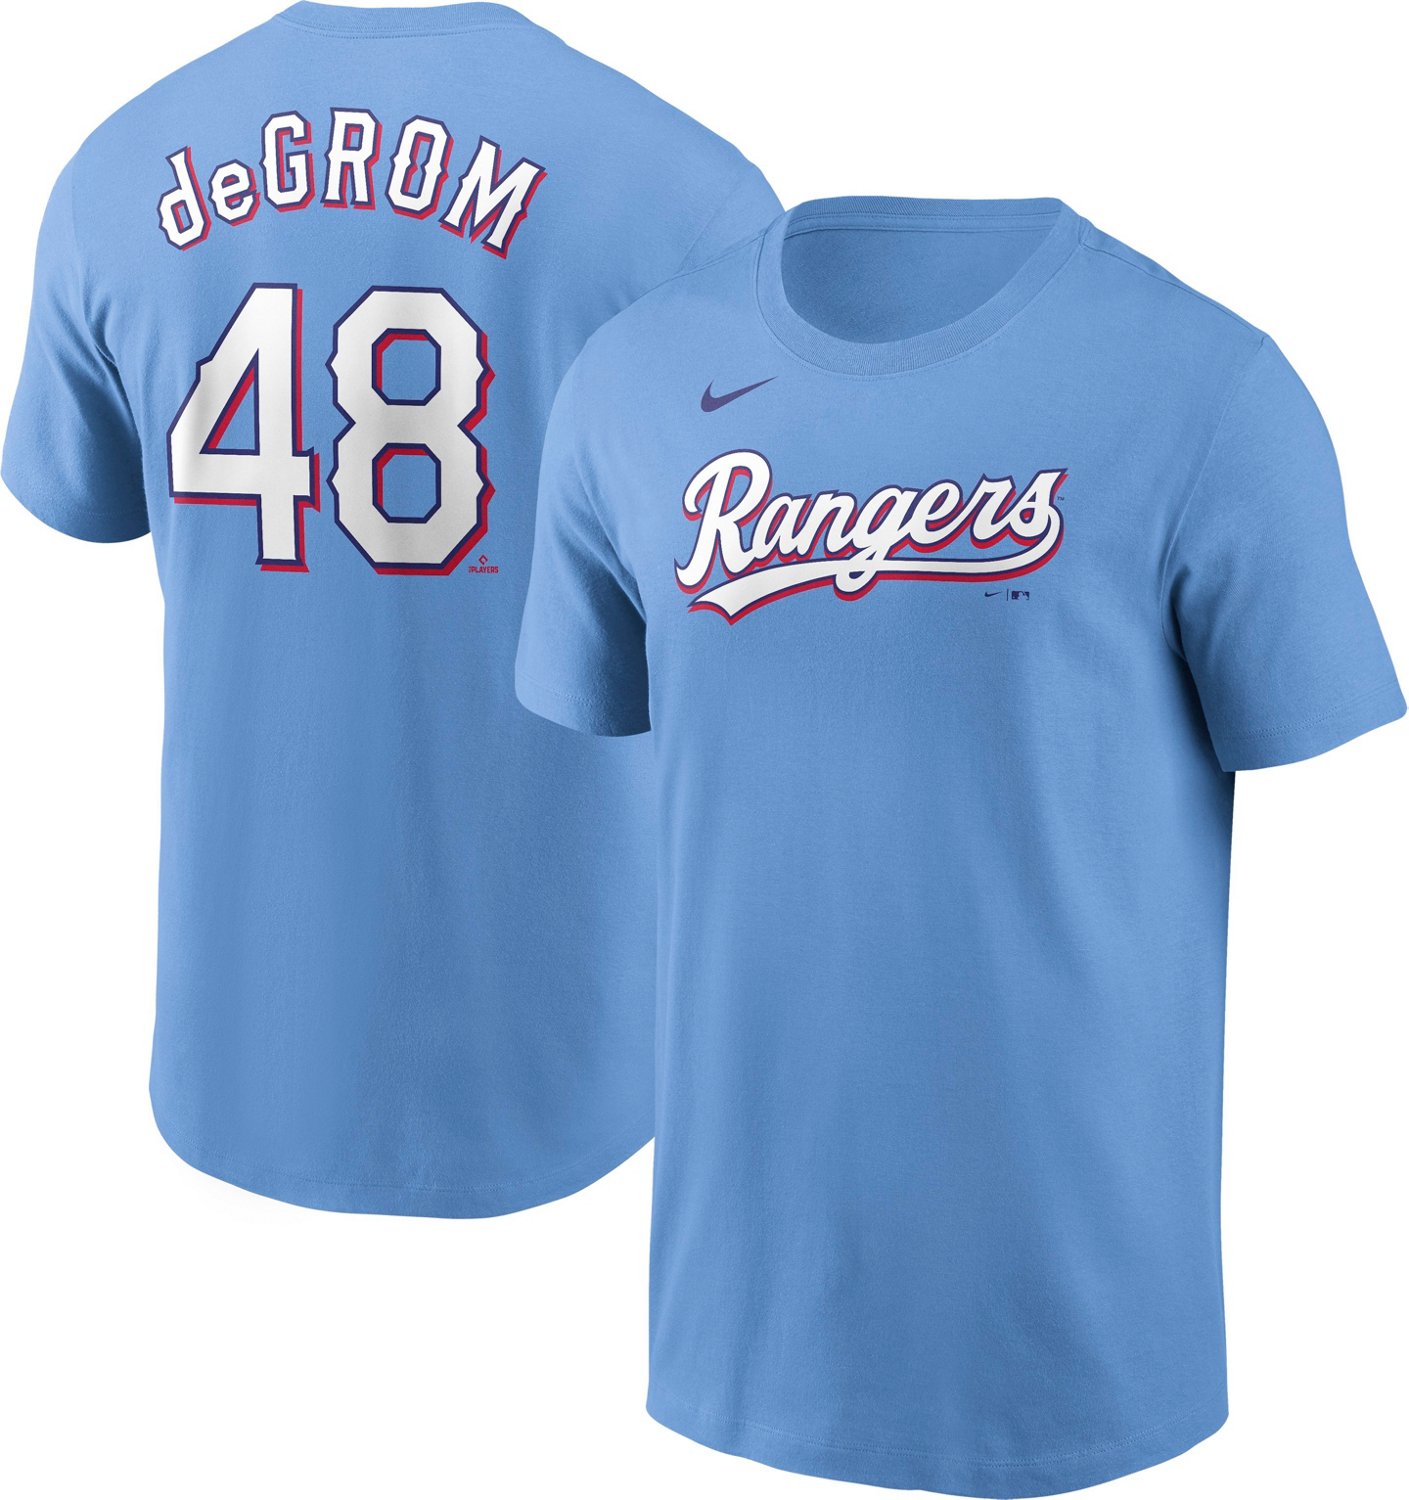 Nike Men's Texas Rangers deGrom Away Name and Number Graphic T